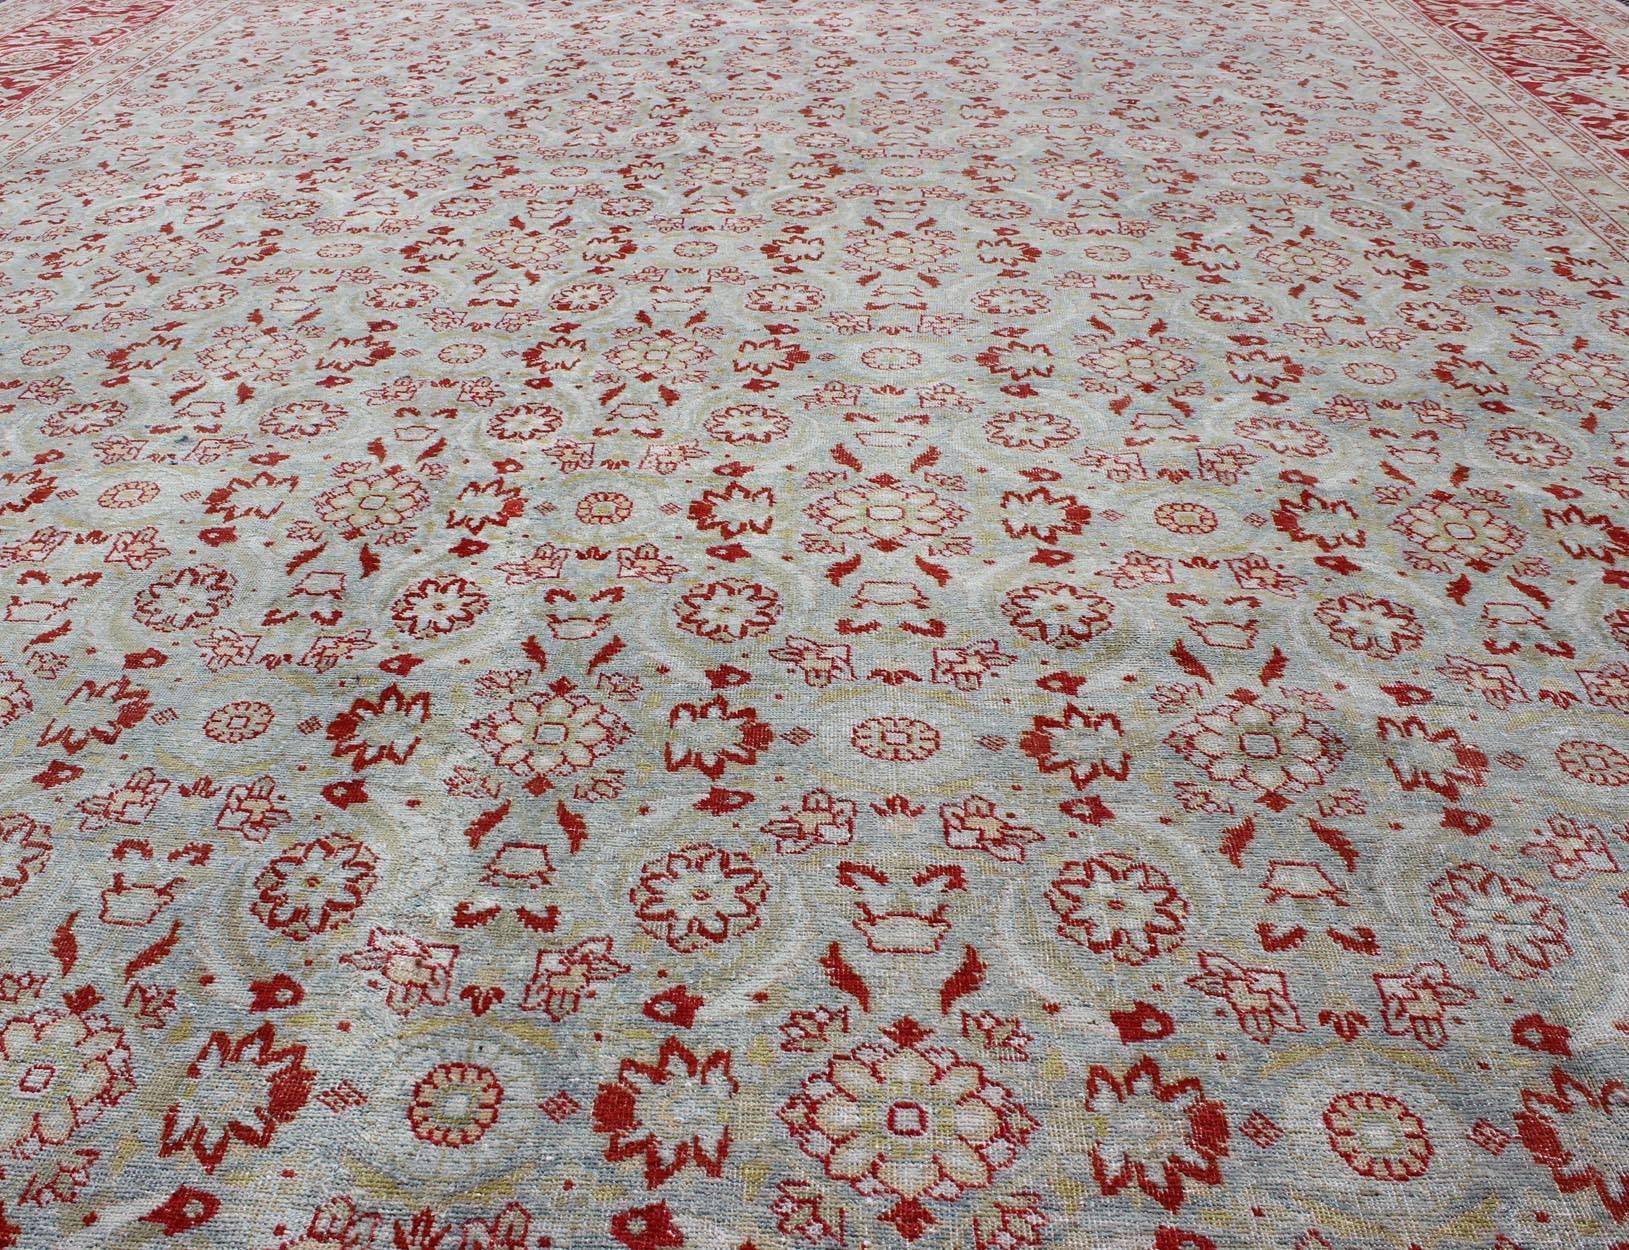 Wool All-Over Floral Design Antique Persian Tabriz Rug in Shades of Gray-Blue and Red For Sale